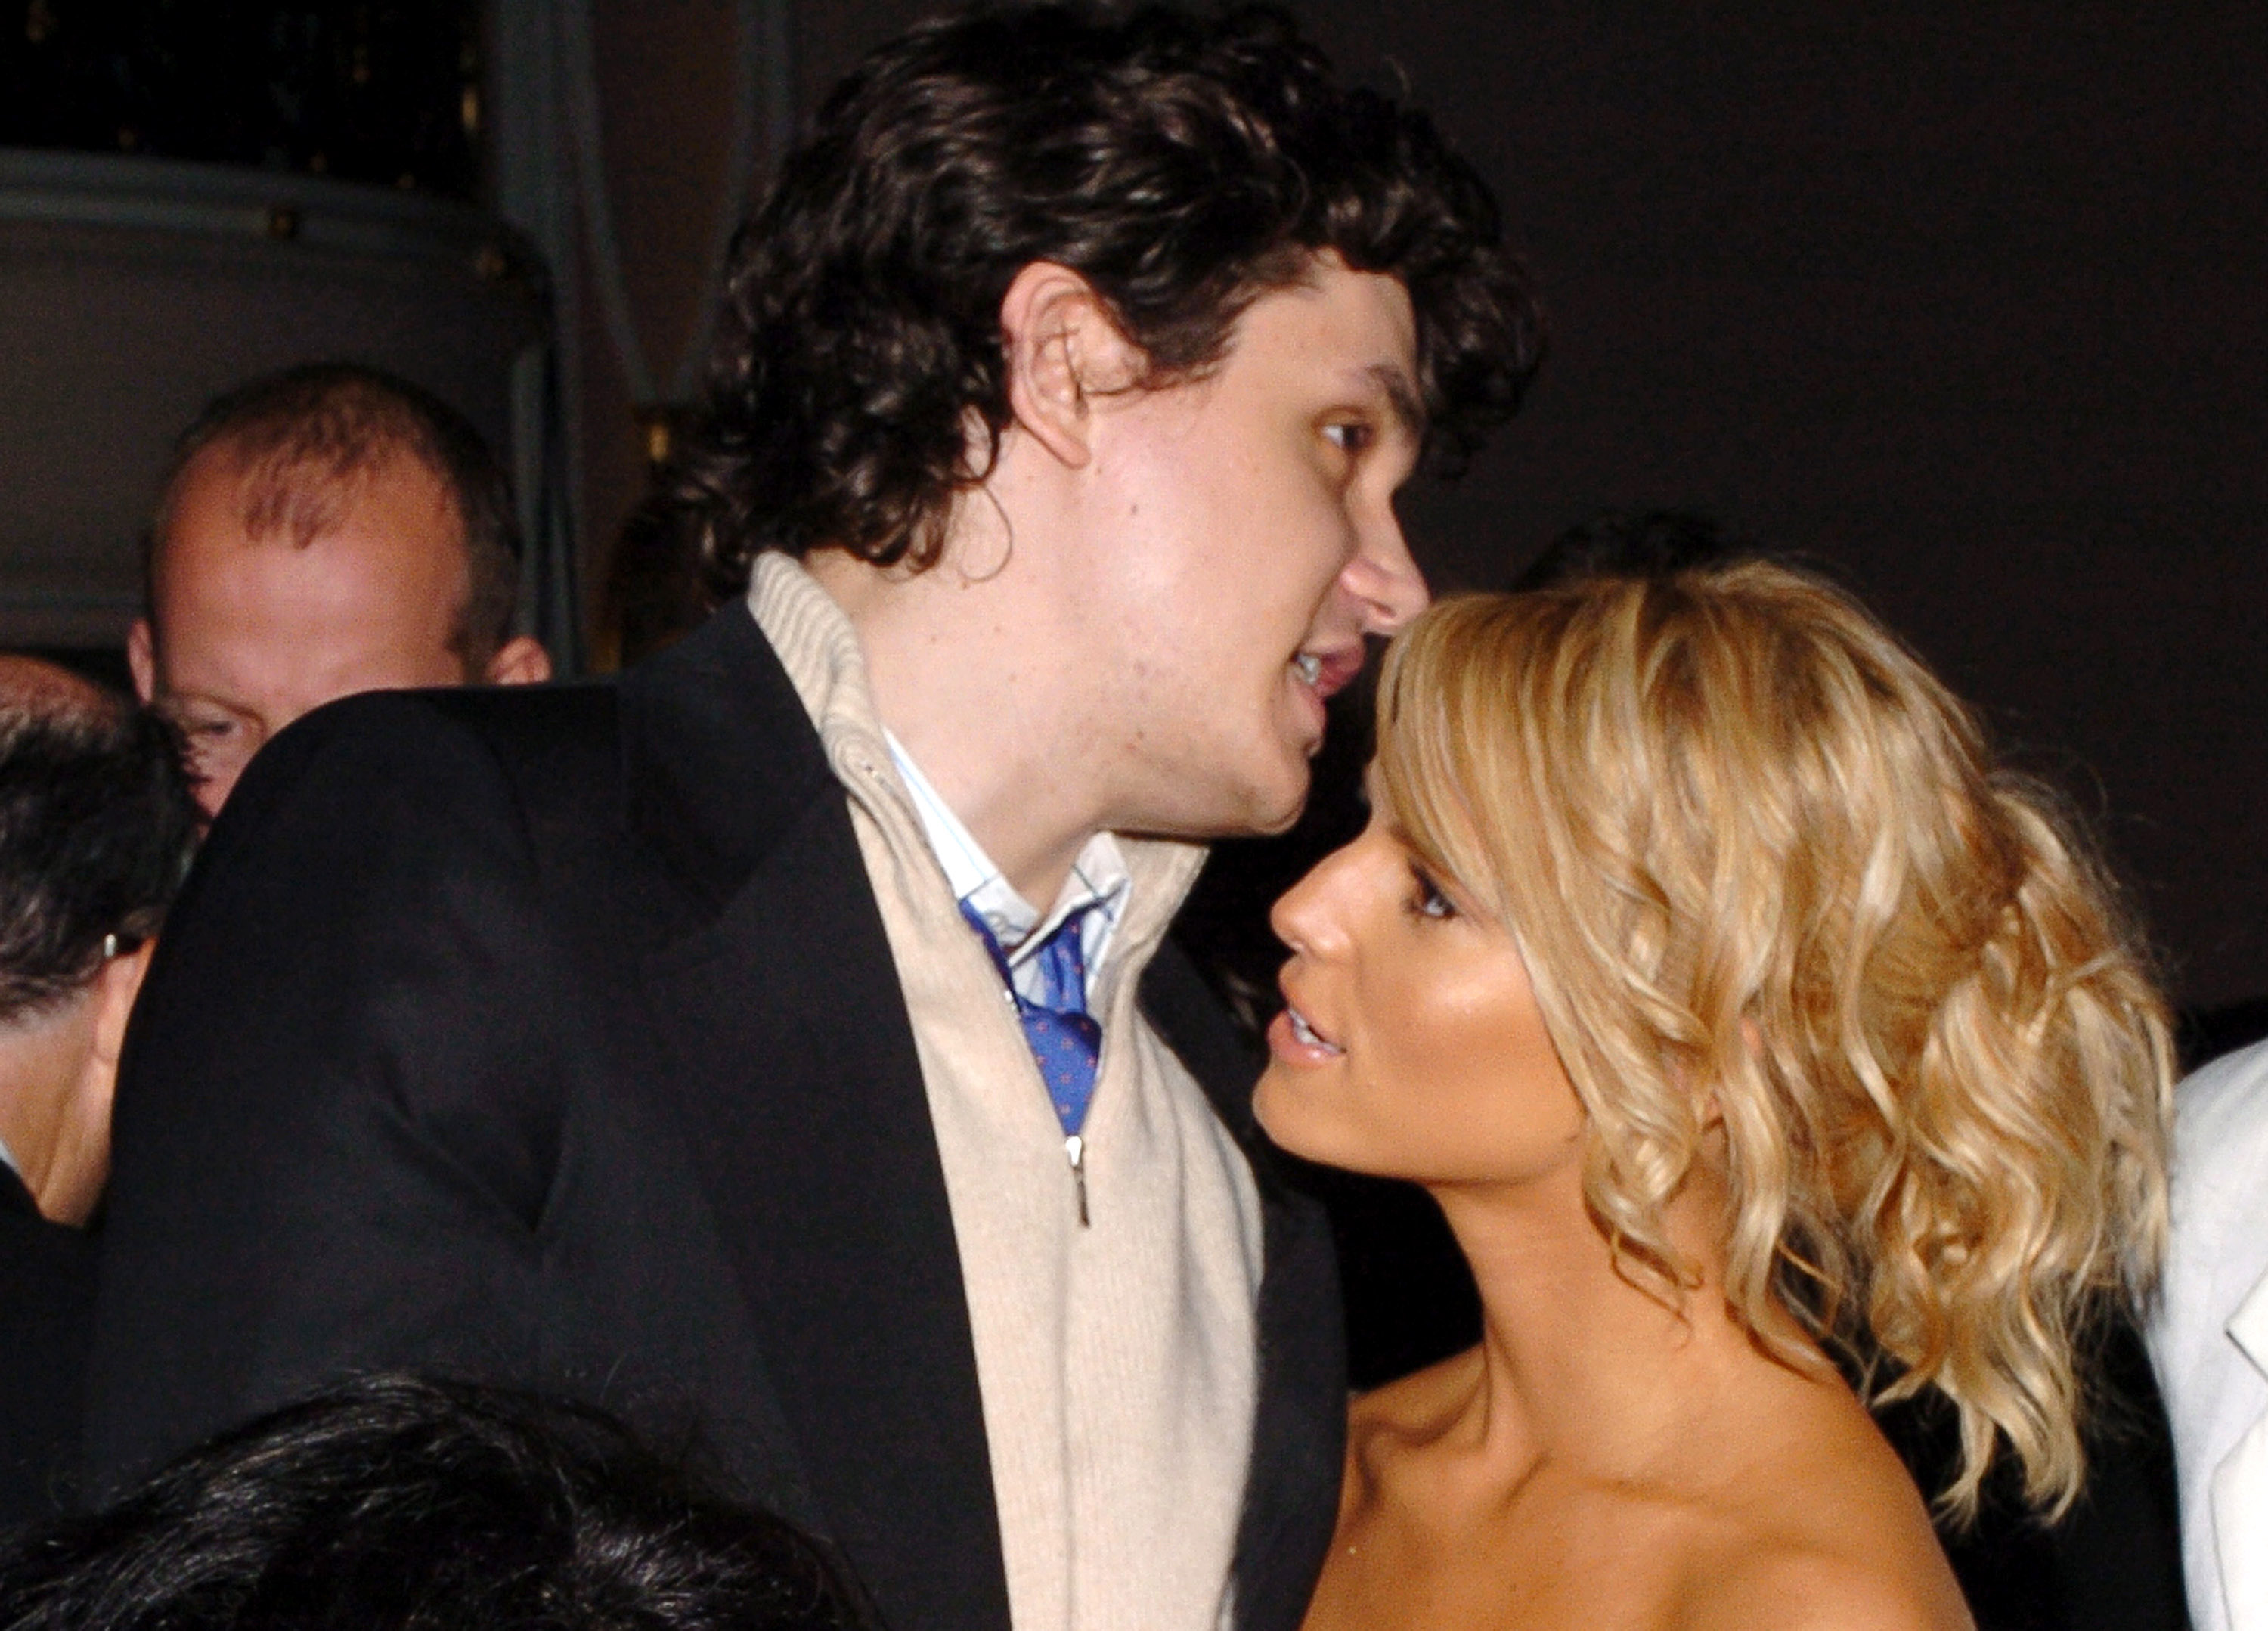 John Mayer and Jessica Simpson at a Grammy's party